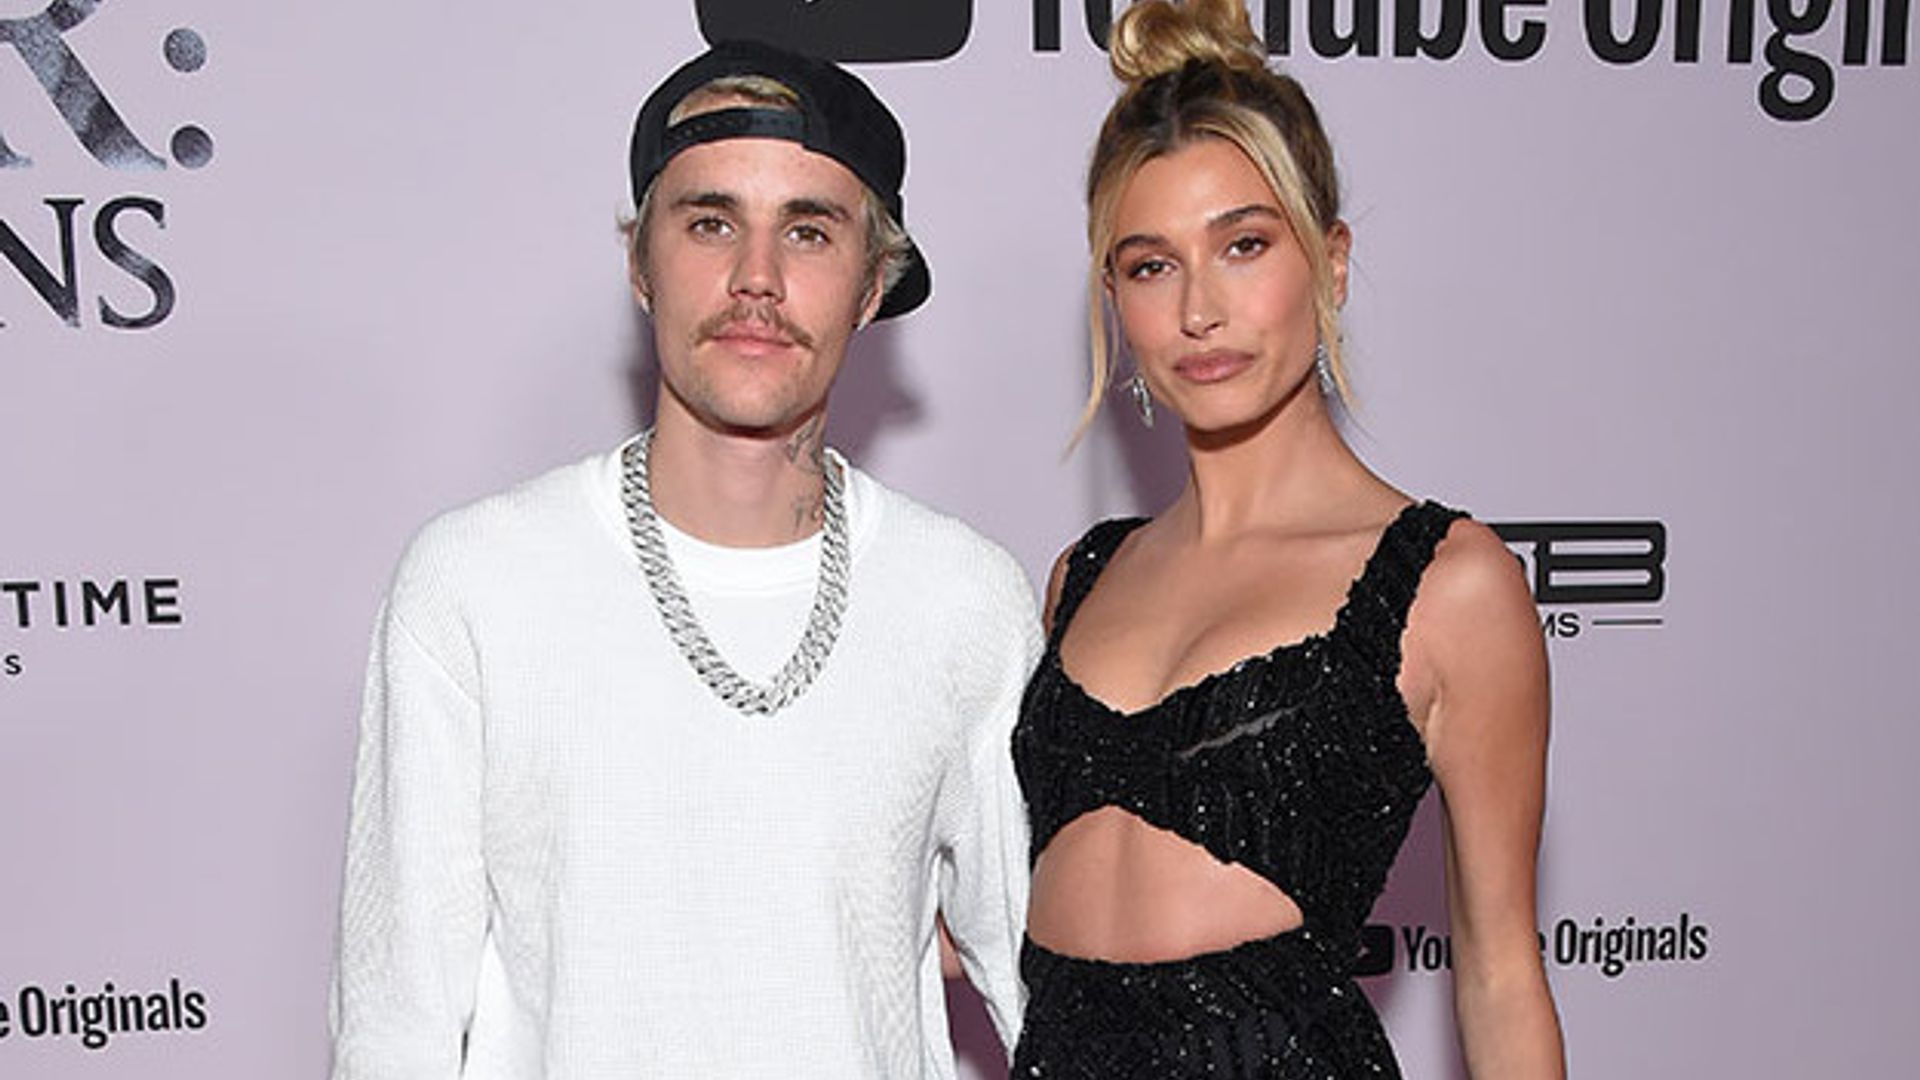 Justin Bieber shares photos from his joint baptism with Hailey Baldwin